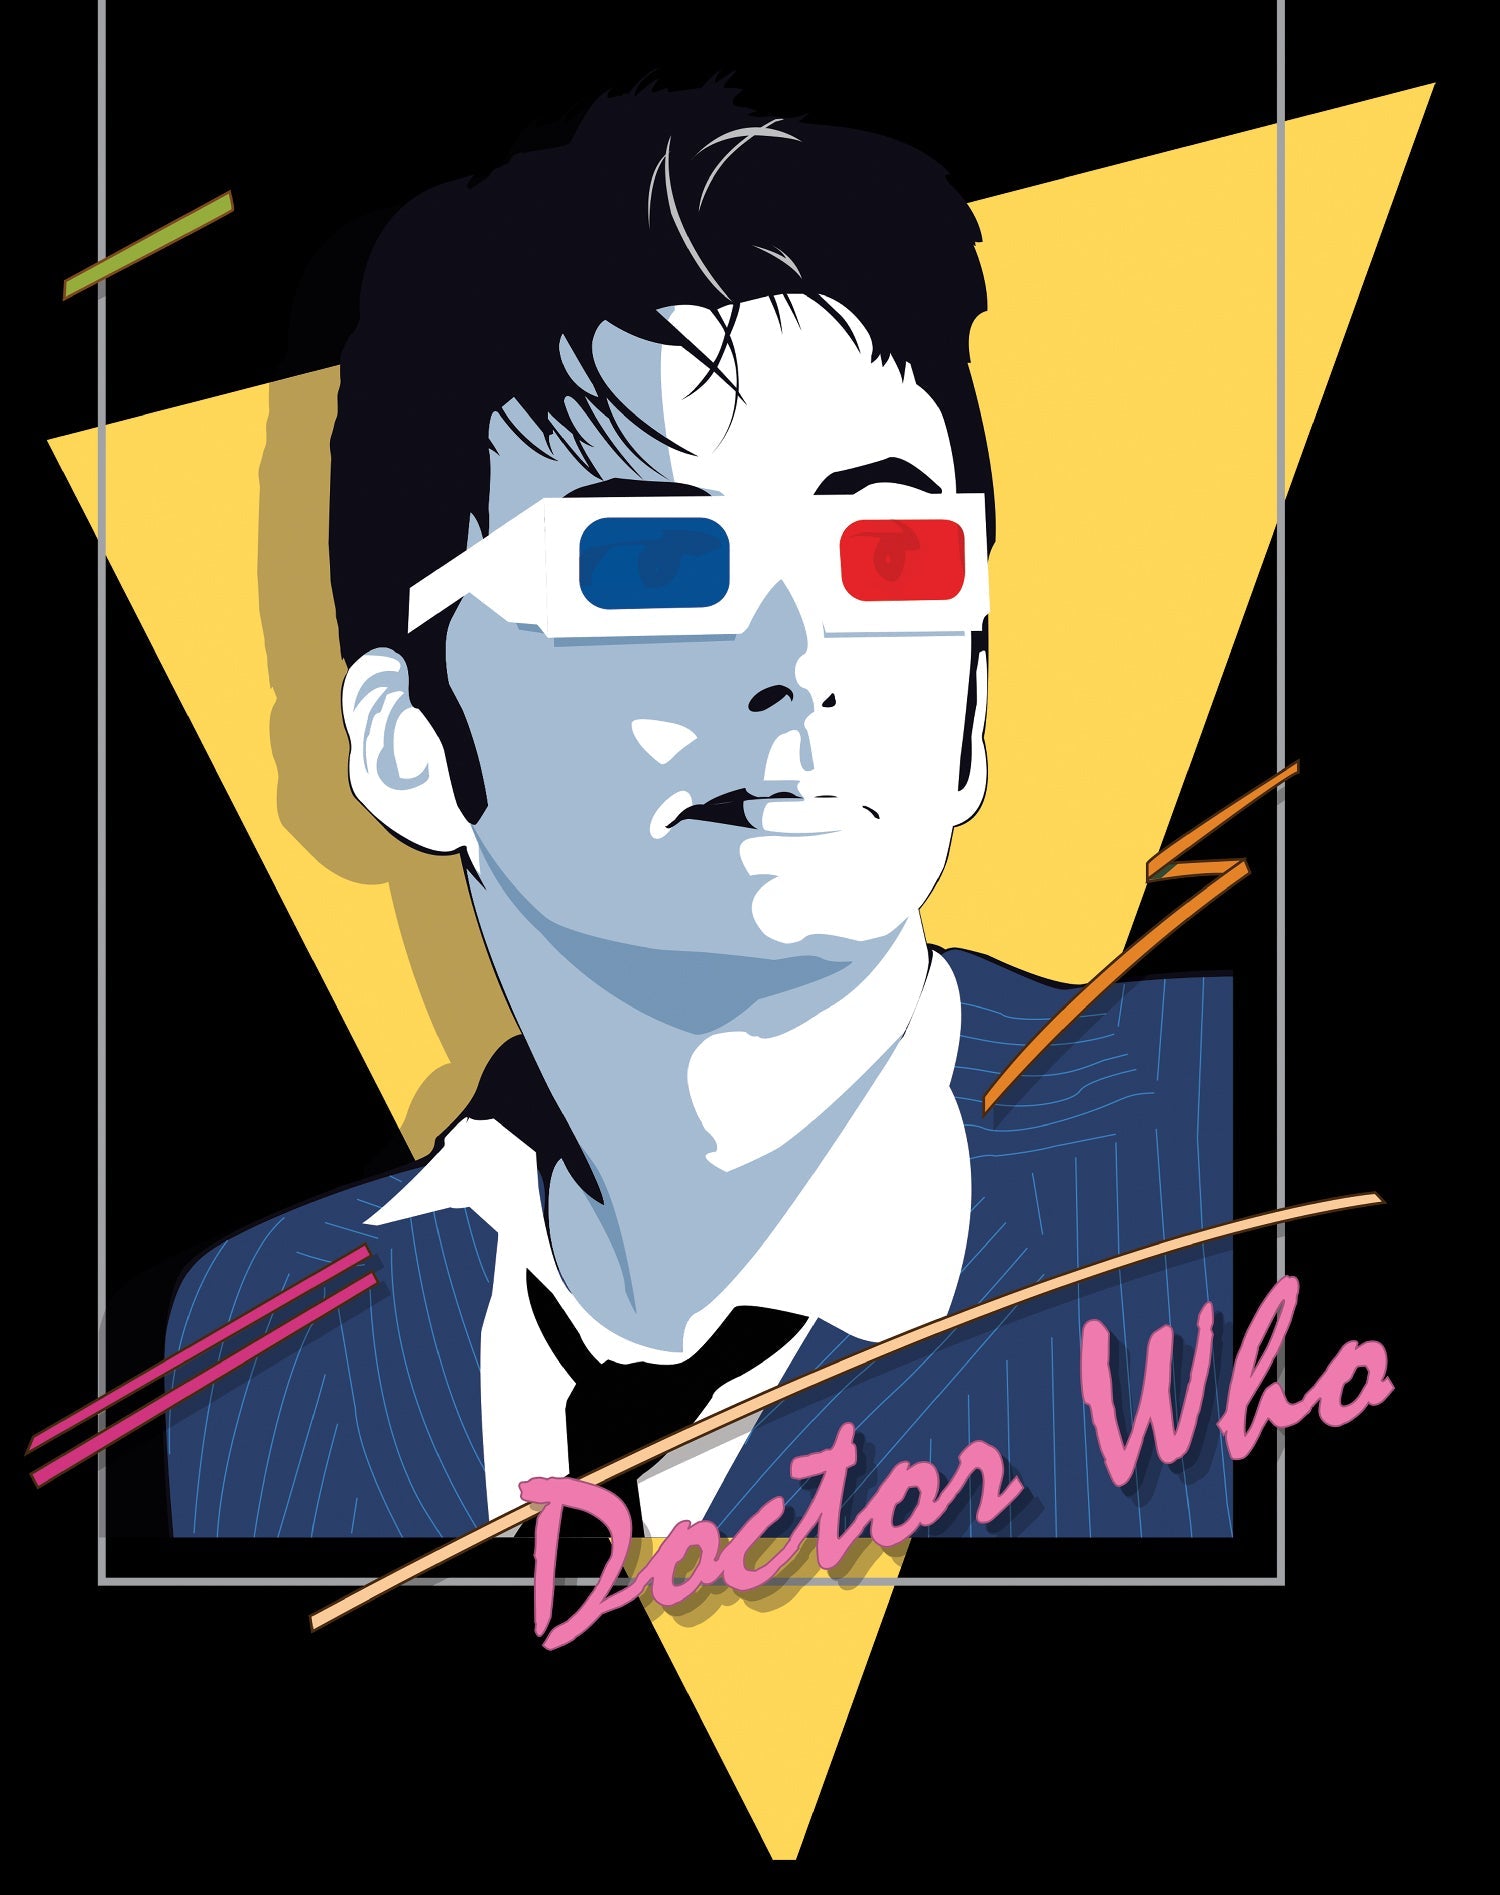 Doctor Who 80s Tenant Nagel Official Women's T-shirt